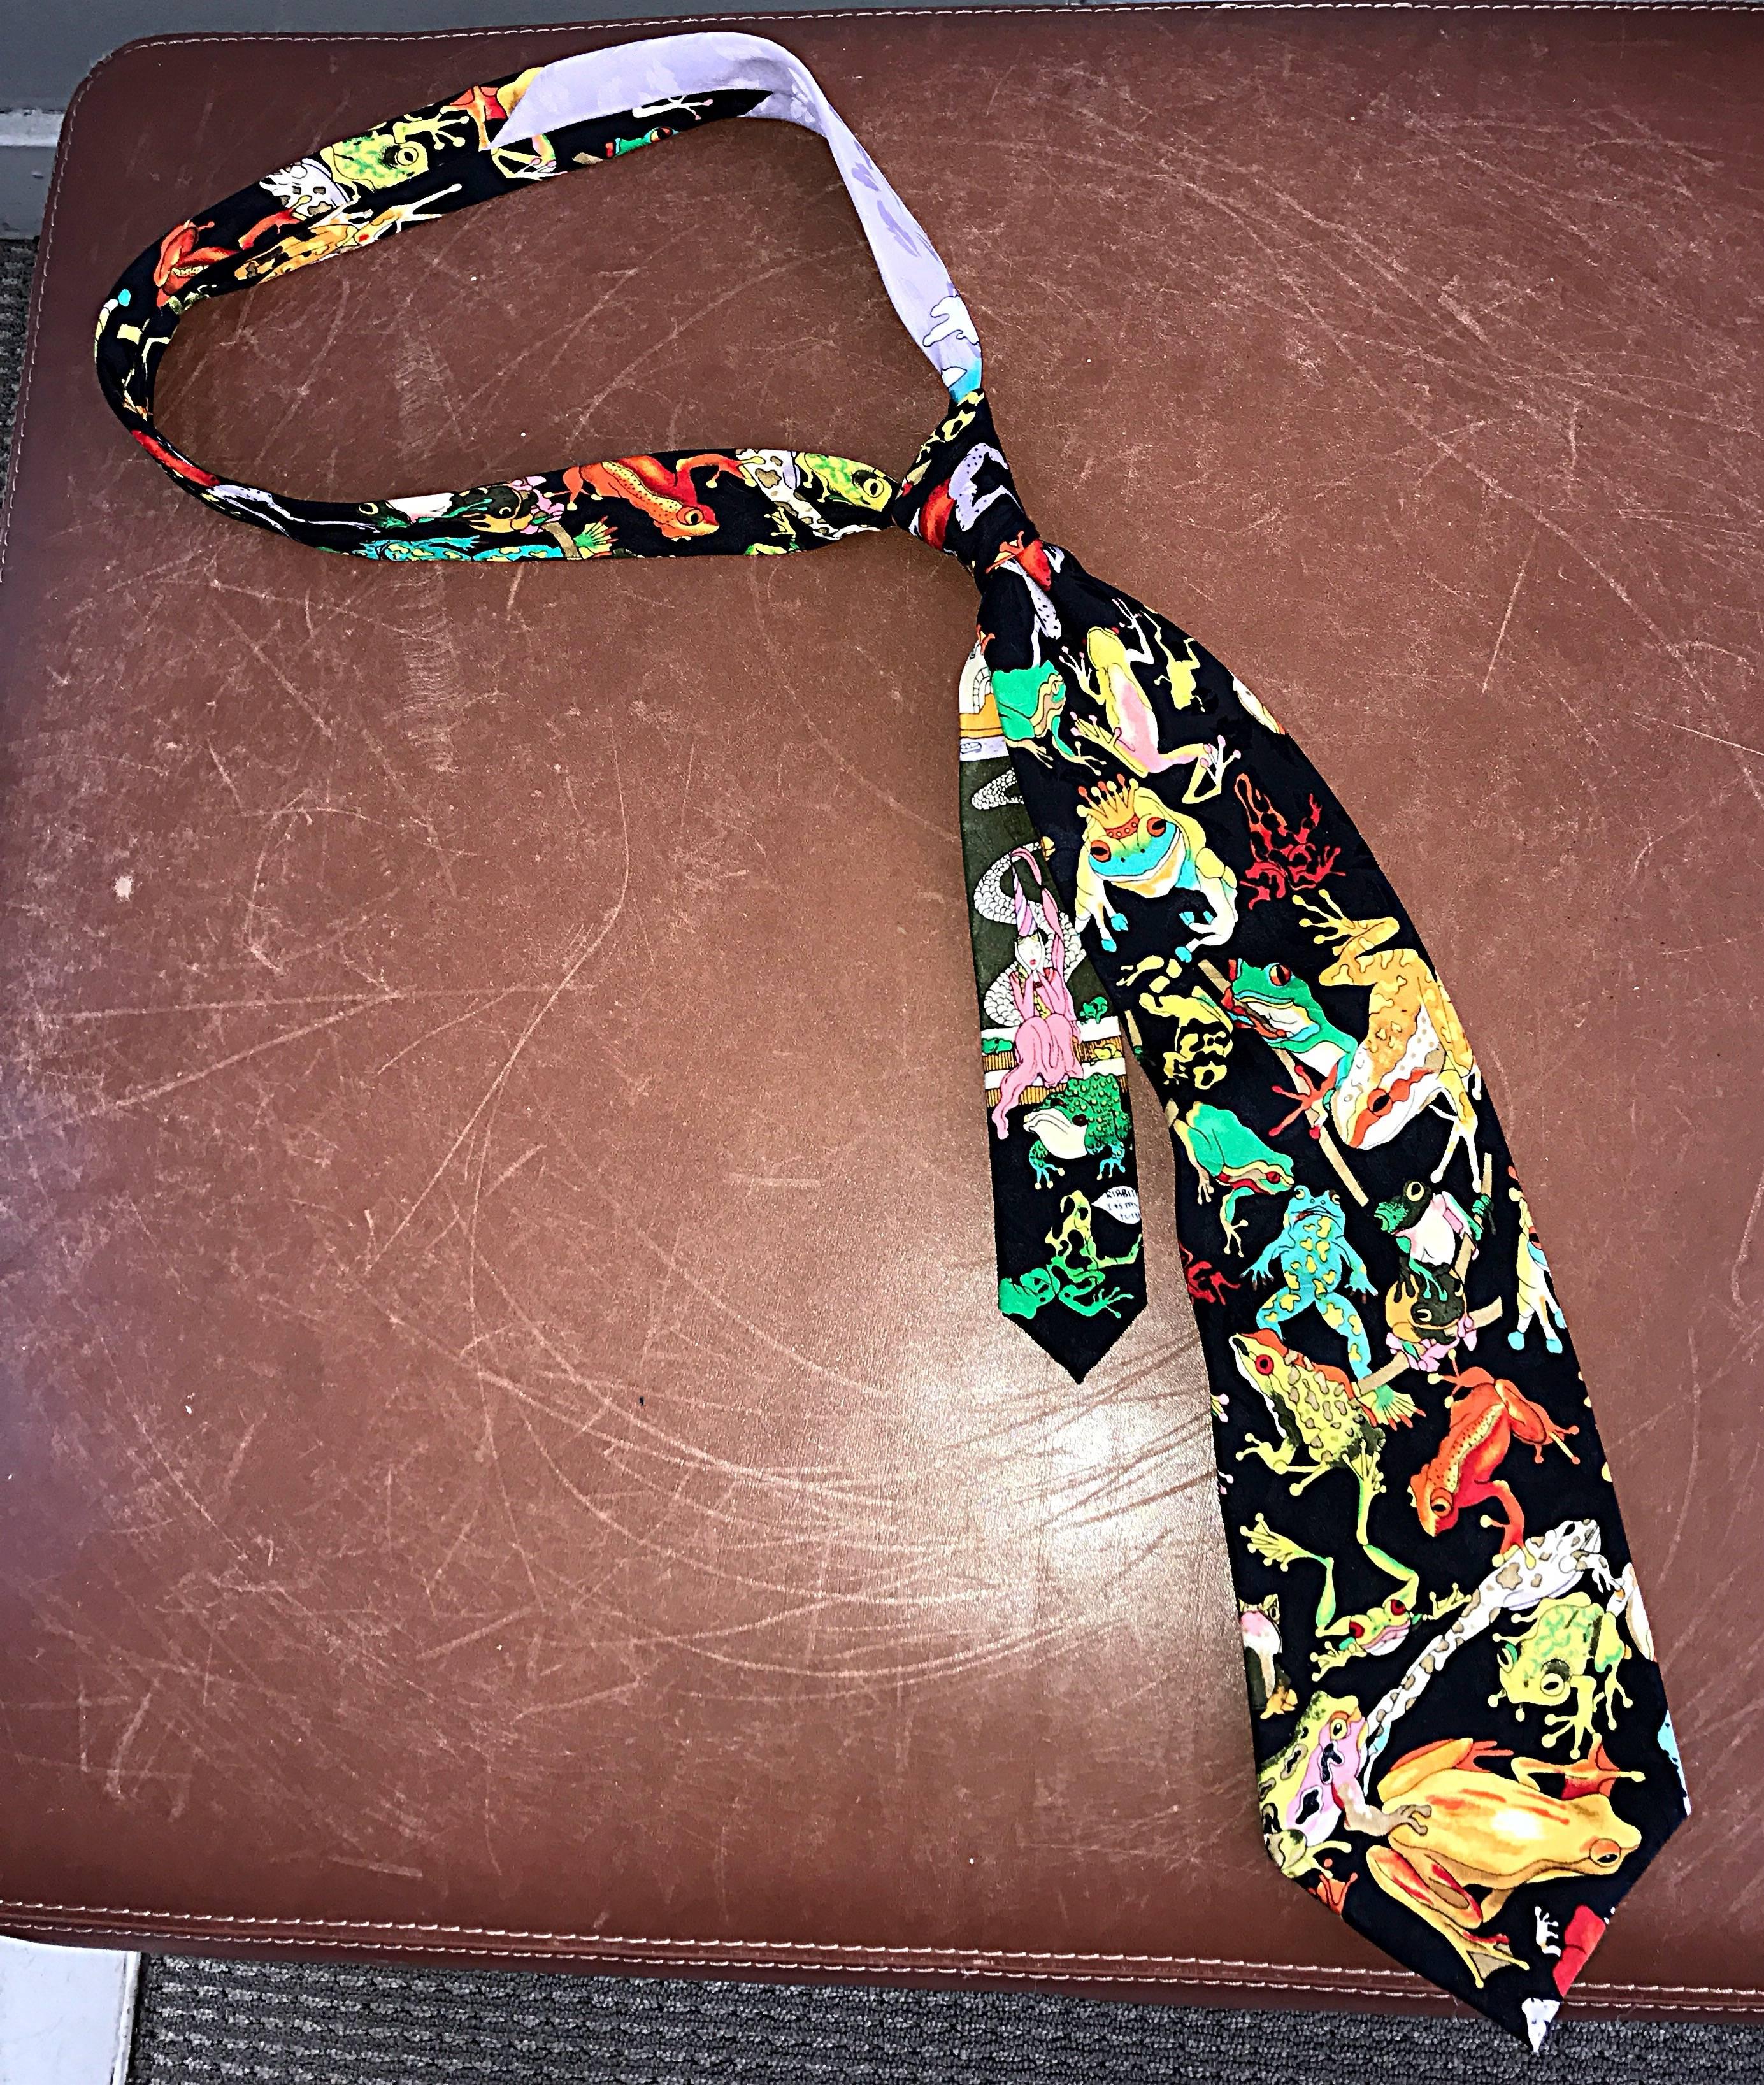 Extremely rare vintage 1992 NICOLE MILLER early 90s silk limited edition neck tie! Features novelty frogs printed thorughout. Some frogs have crowns! Black silk background, with green, orange, yellow, blue and purple frogs throughout. Only 100 of